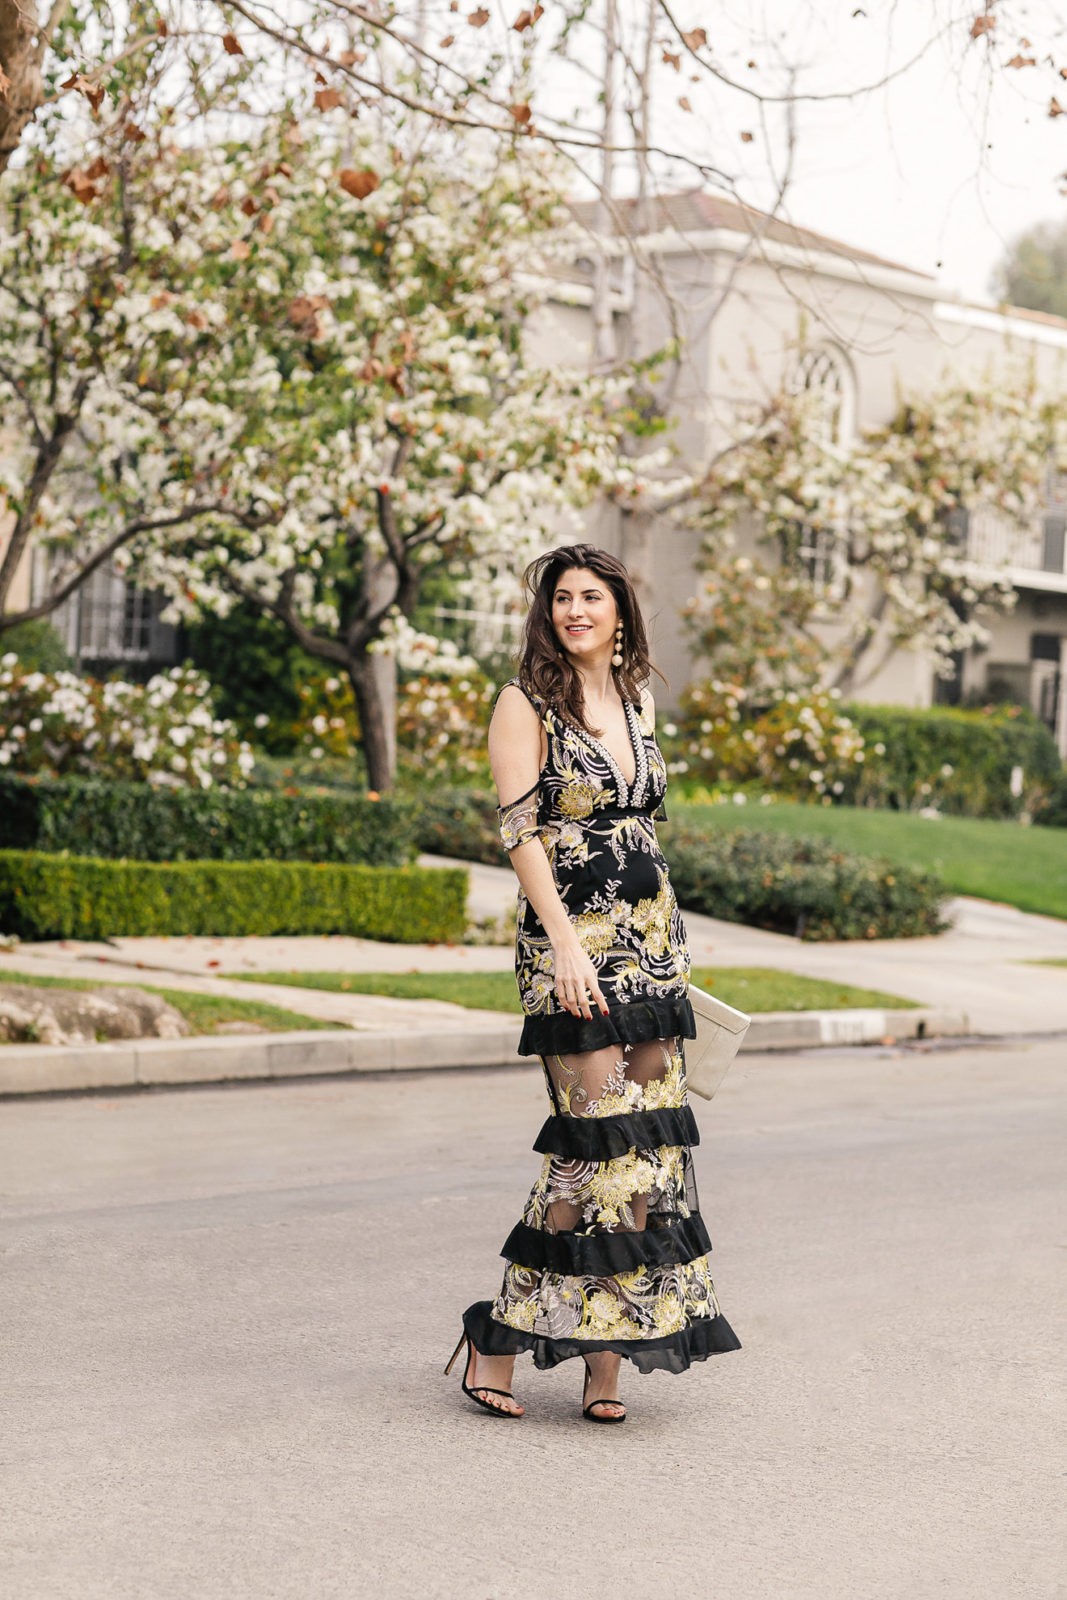 Spring Wedding Outfits featured by top US fashion blogger Laura Lily; Image of a woman wearing an Asos dress, Express clutch, Stuart Weitzman heels and Bauble Bar earrings.